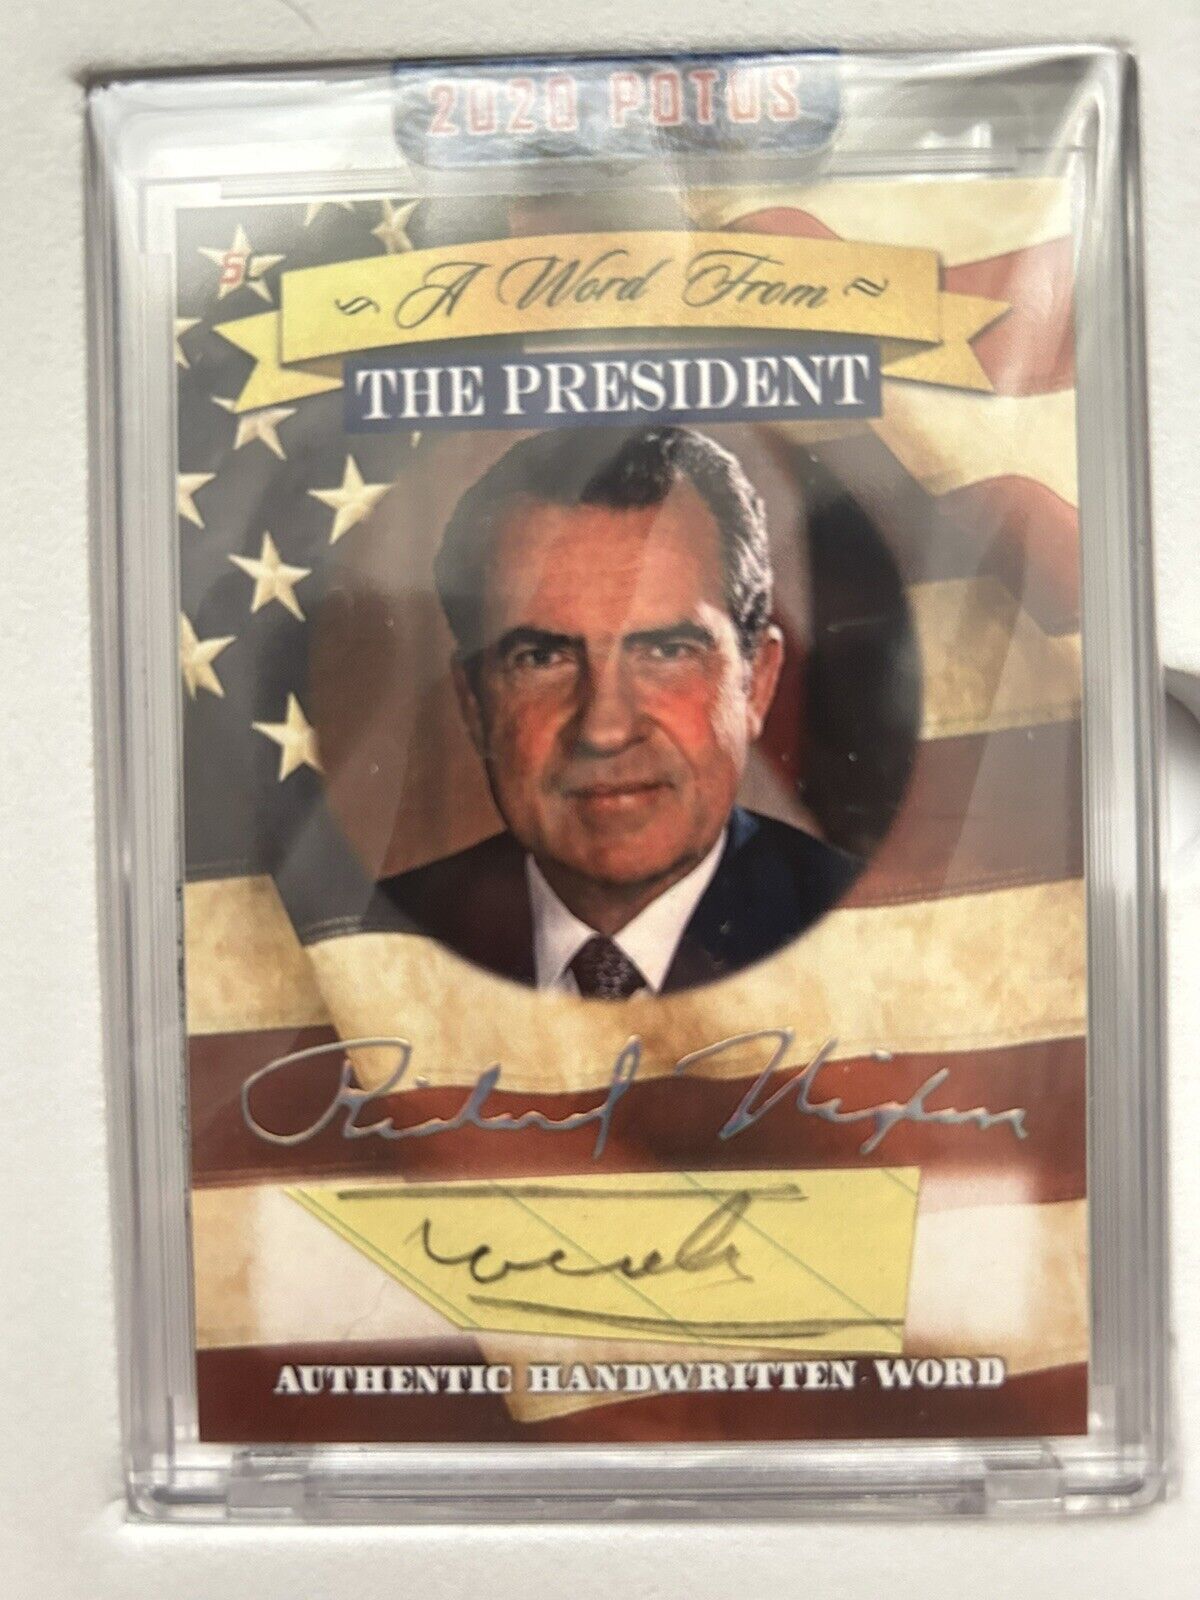 2020 potus a word from the president Richard Nixon With Box